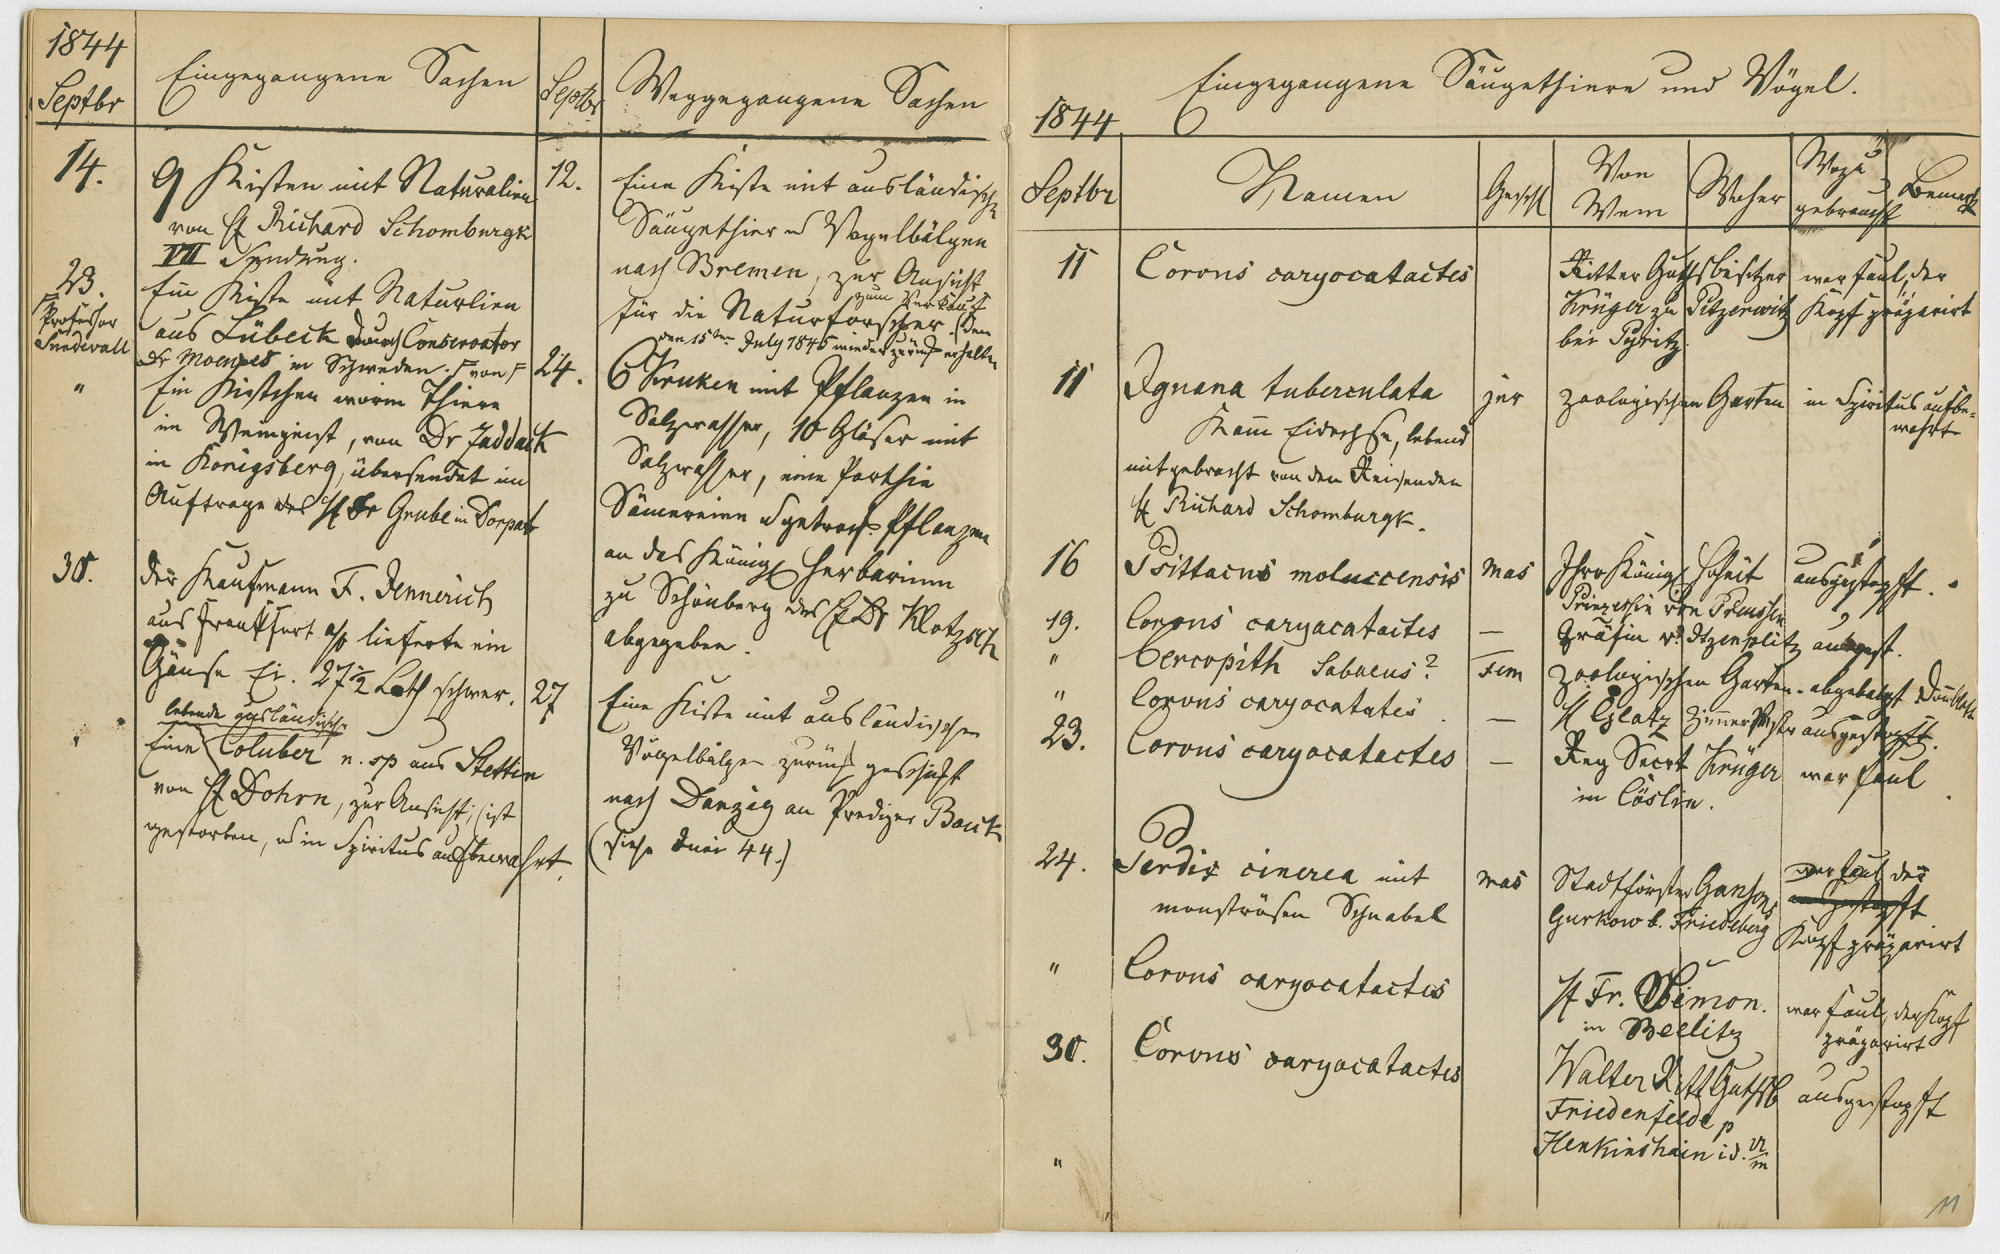 Double page of an open notebook, whose hand-written entries for the month of September 1844 have been divided by hand into a hand-drawn table.